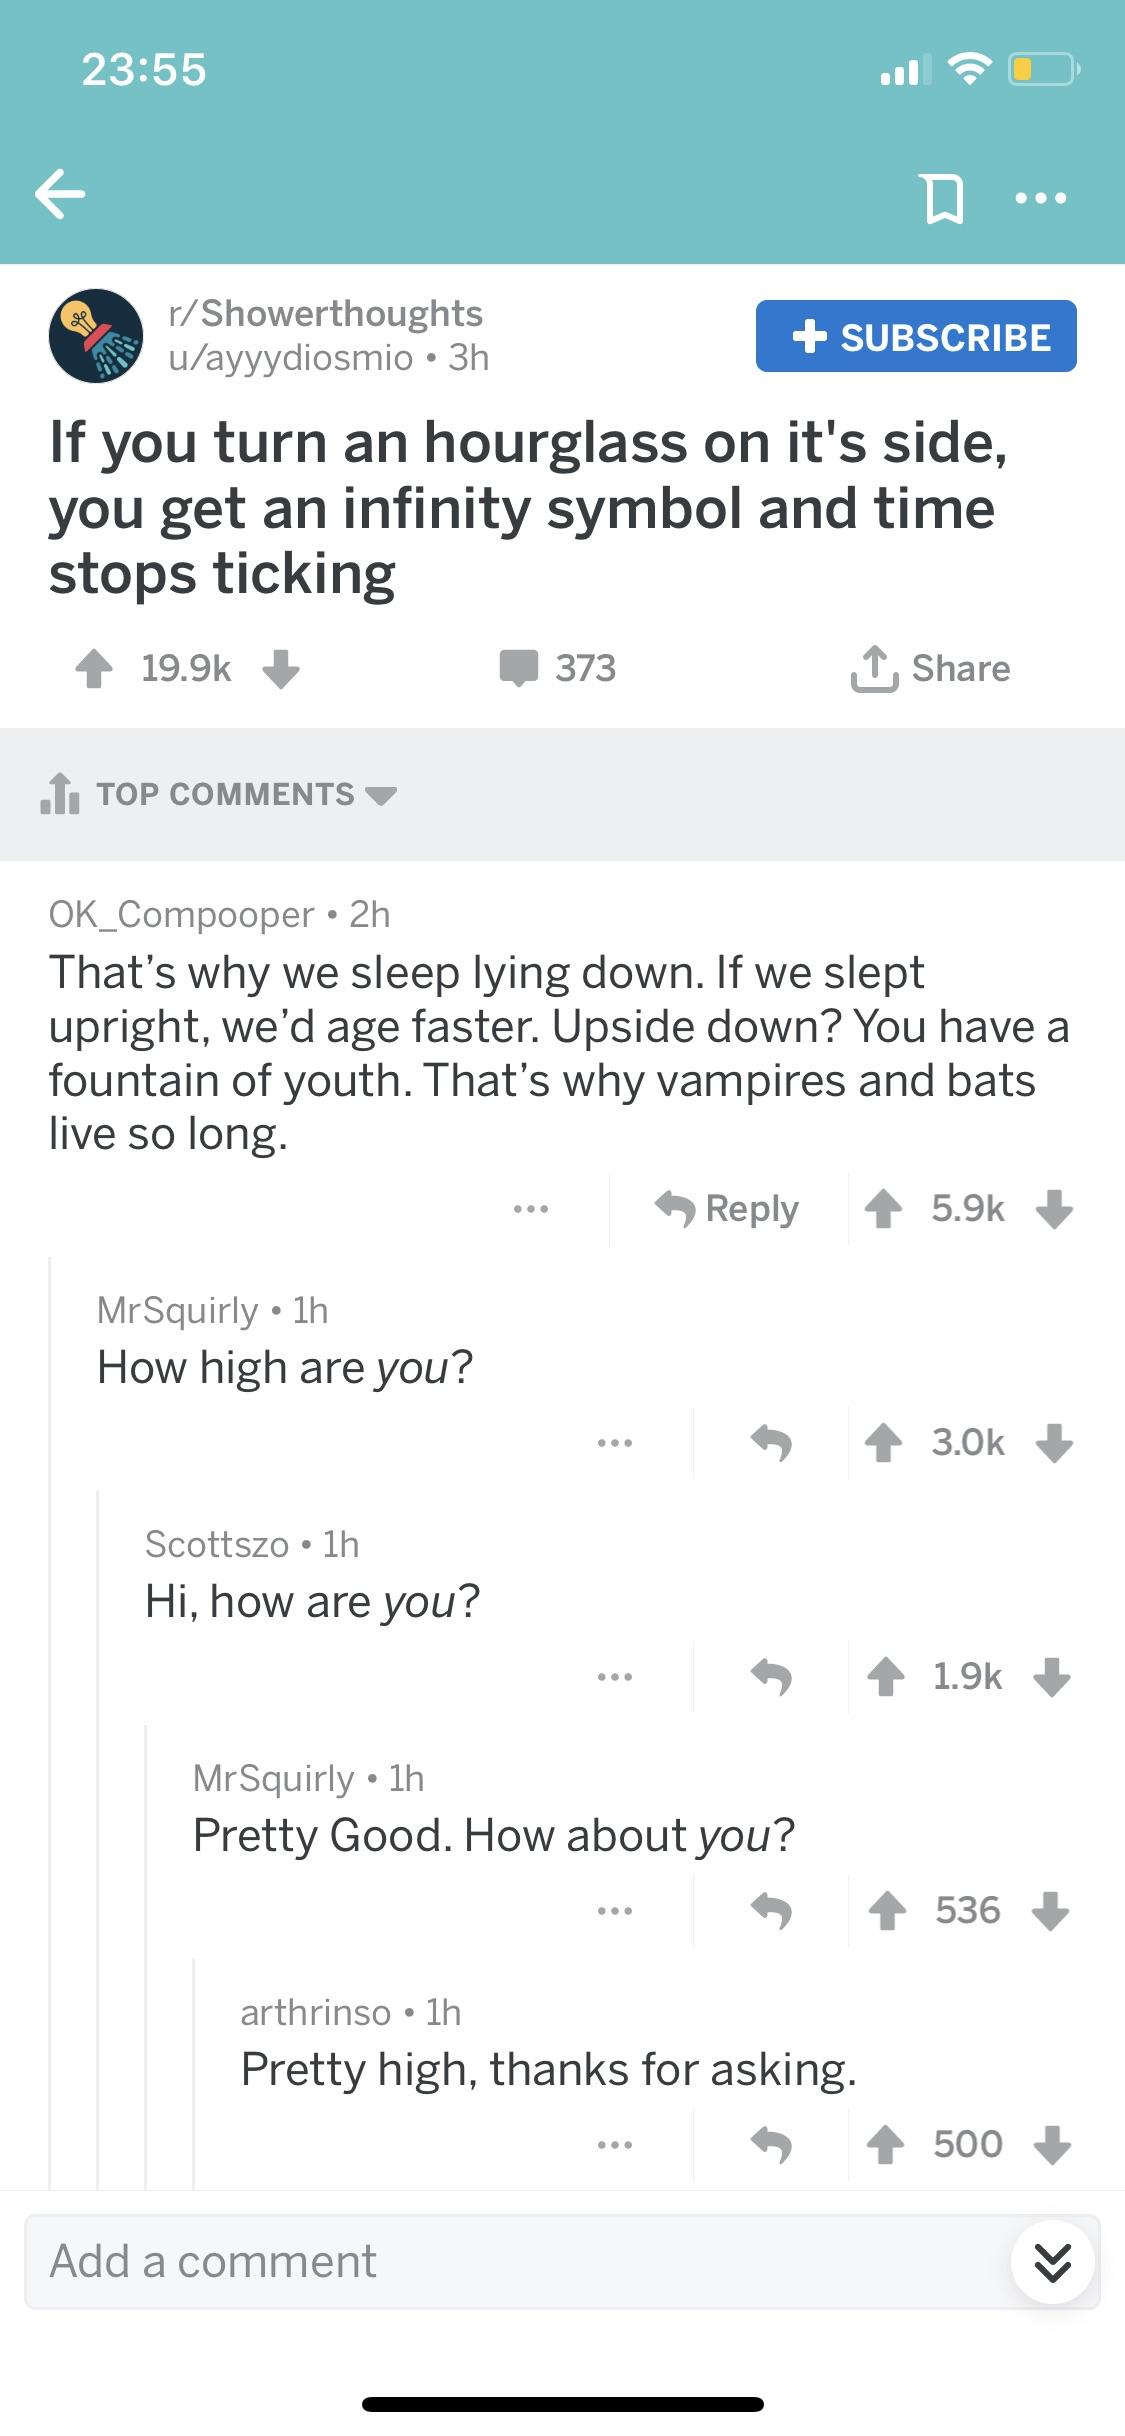 screenshot - rShowerthoughts Subscribe uayyydiosmio 3h If you turn an hourglass on it's side, you get an infinity symbol and time stops ticking 0373 1 1. Top OK_Compooper 2h That's why we sleep lying down. If we slept upright, we'd age faster. Upside down